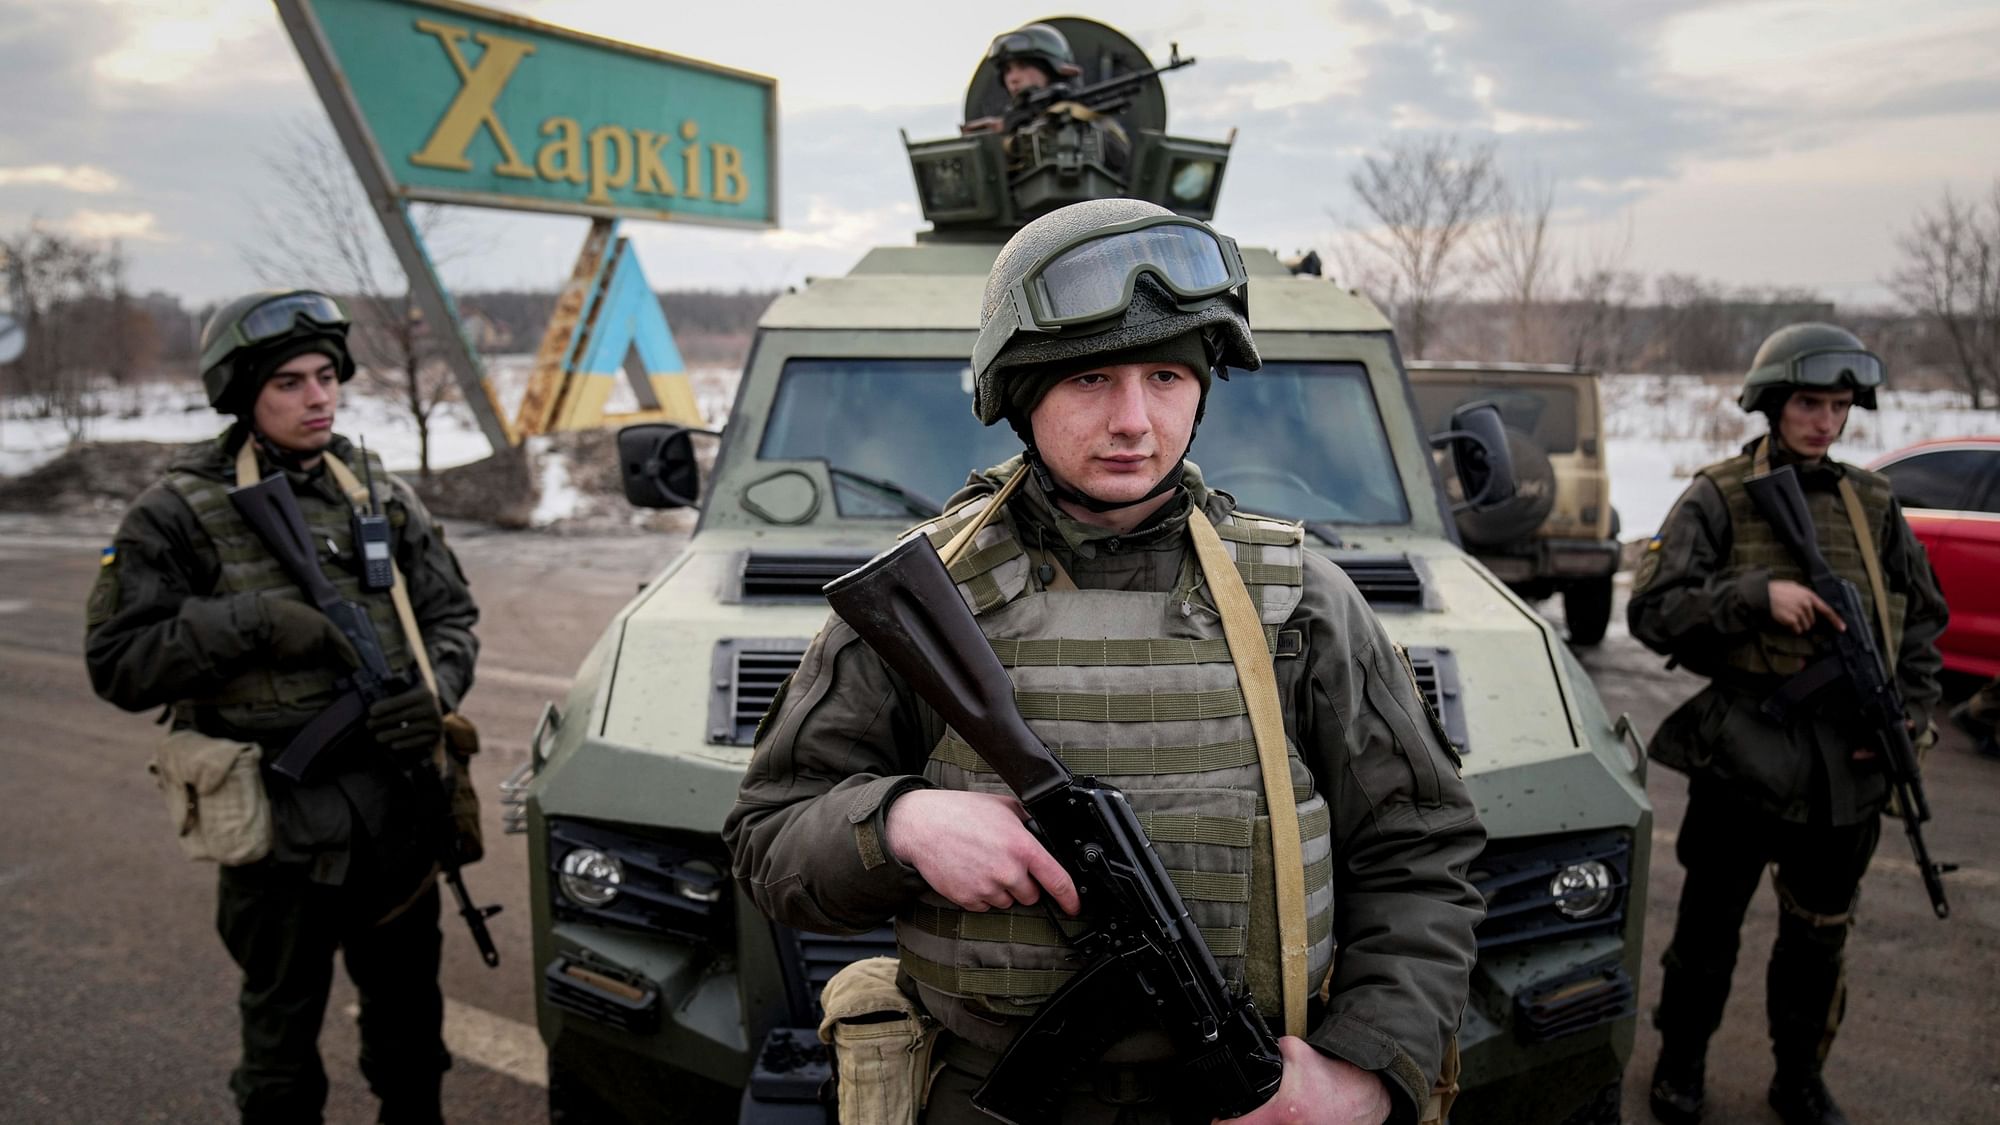 <div class="paragraphs"><p>Russia Ukraine Live News: Ukrainian National guard soldiers guard a mobile checkpoint together with the Ukrainian Security Service agents and police officers during a joint operation in Kharkiv, Ukraine, Thursday.</p></div>